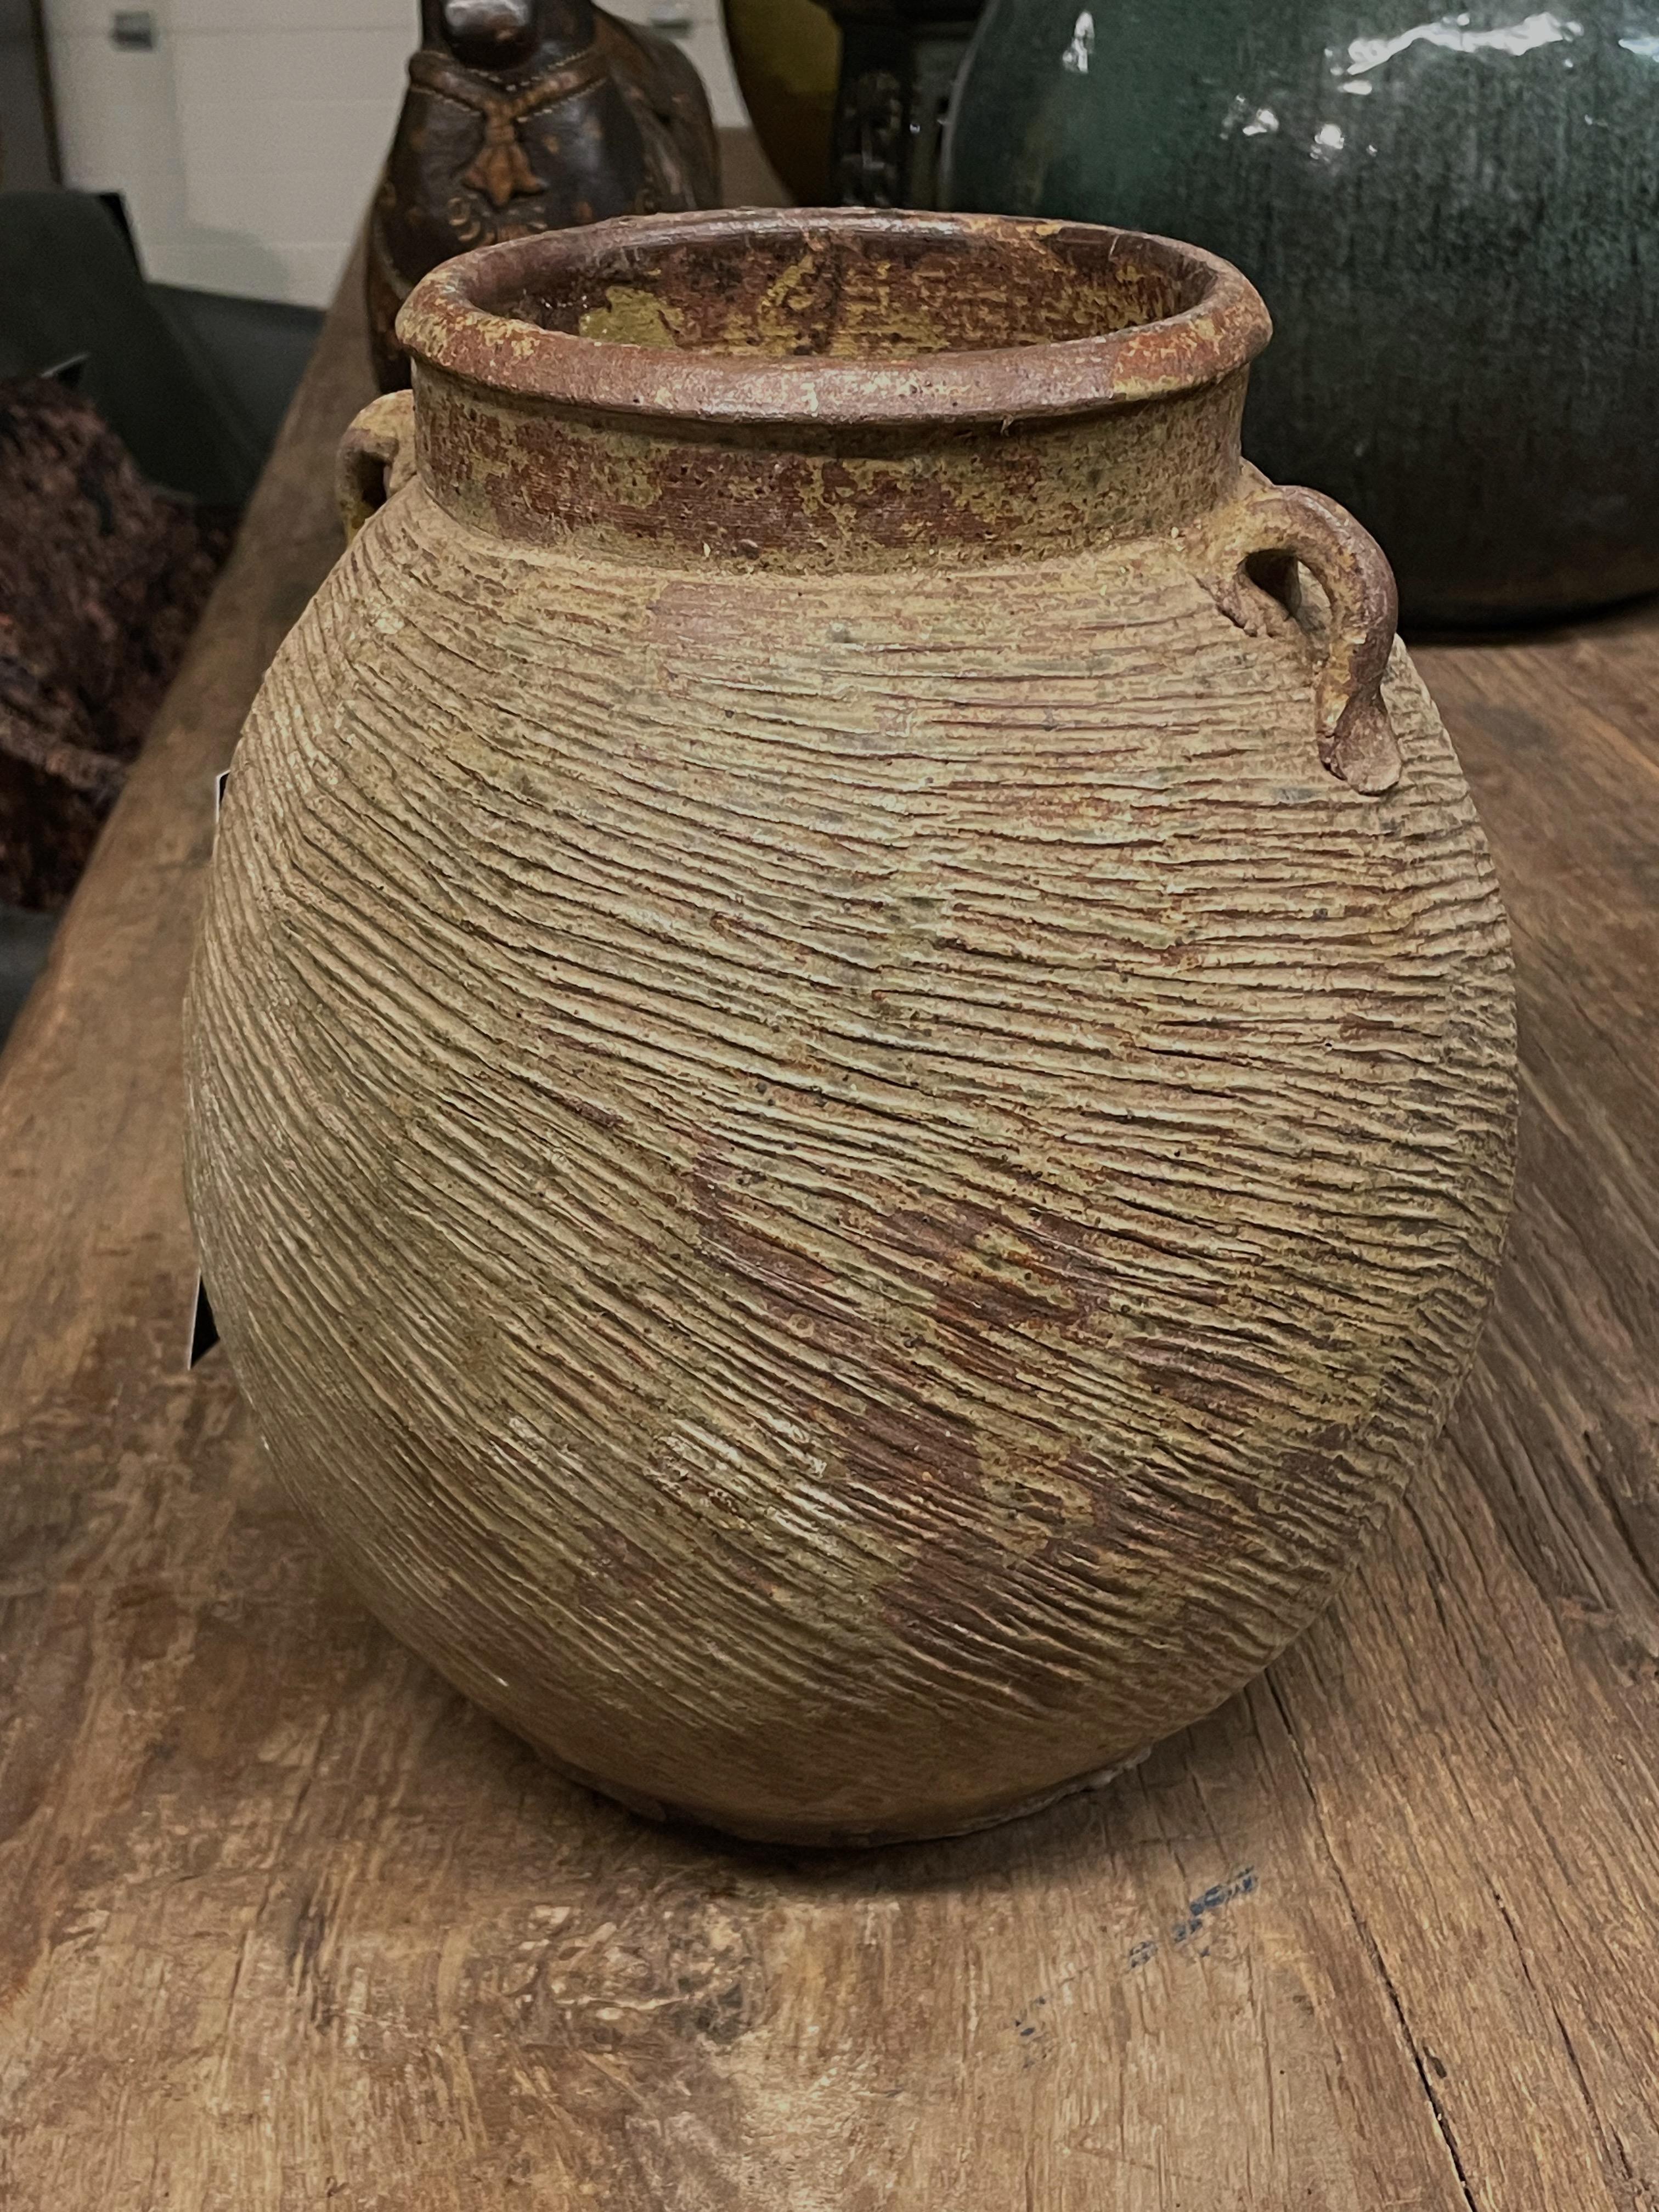 1940's Chinese stoneware vase with raised rib texture.
Two small handles.
Originally used to store grains.
Three available and sold individually.
